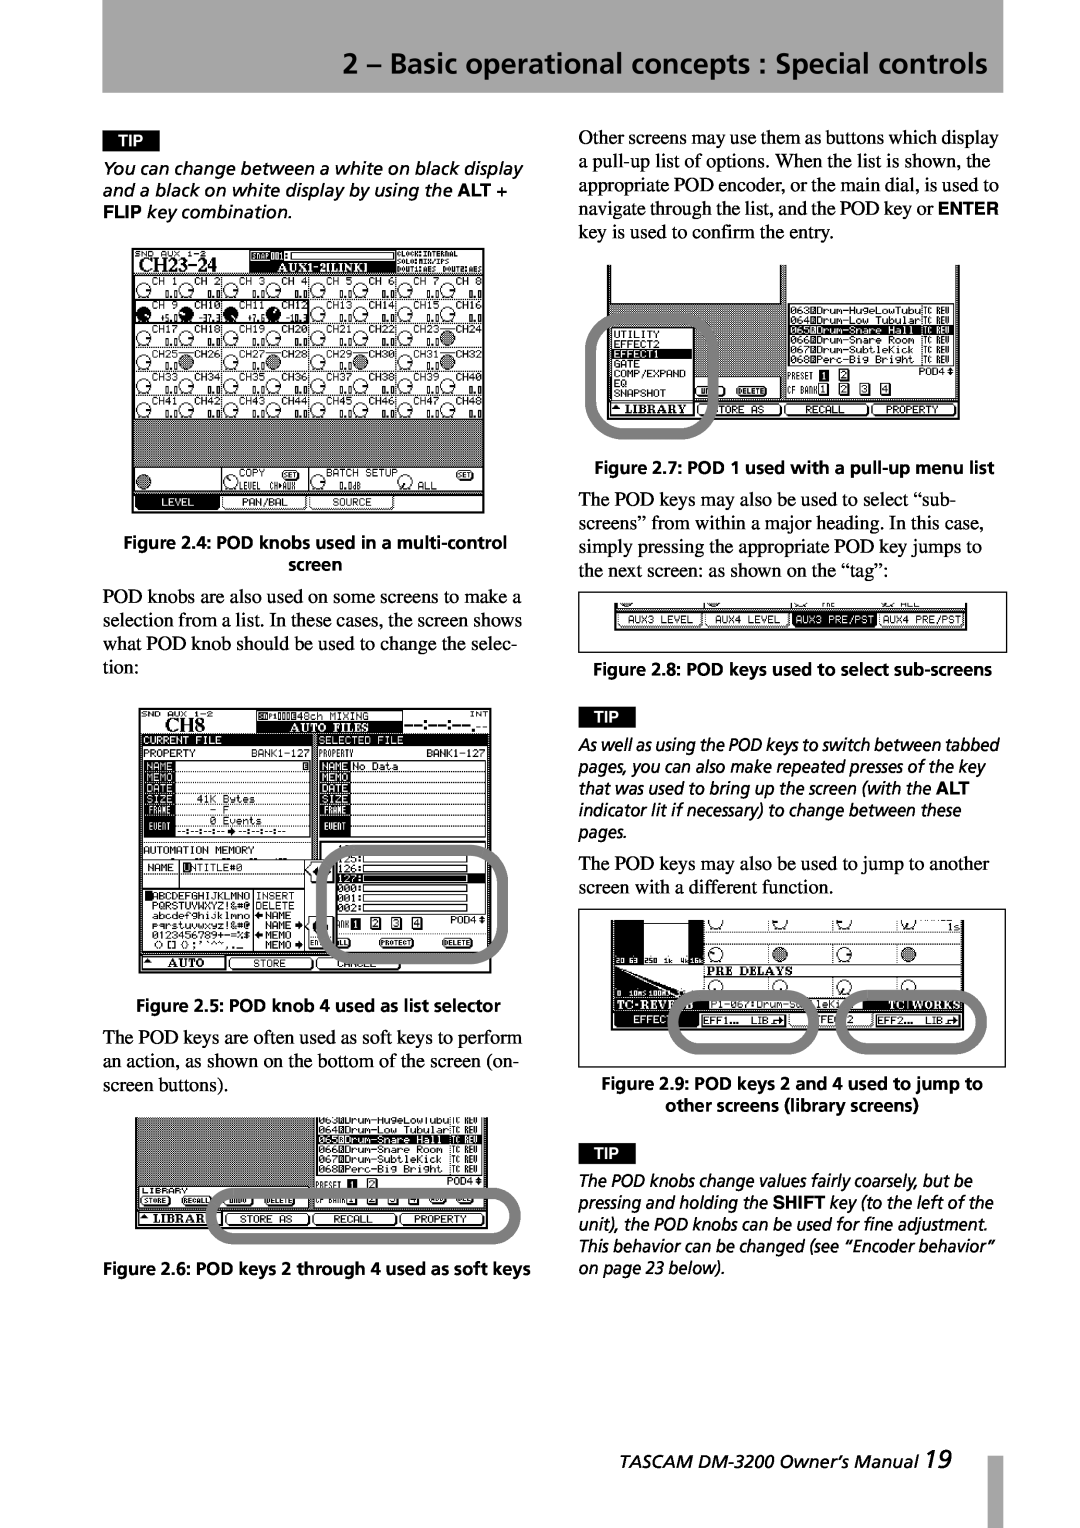 Tascam DM-3200 owner manual 2 – Basic operational concepts : Special controls, 4: POD knobs used in a multi-control, screen 